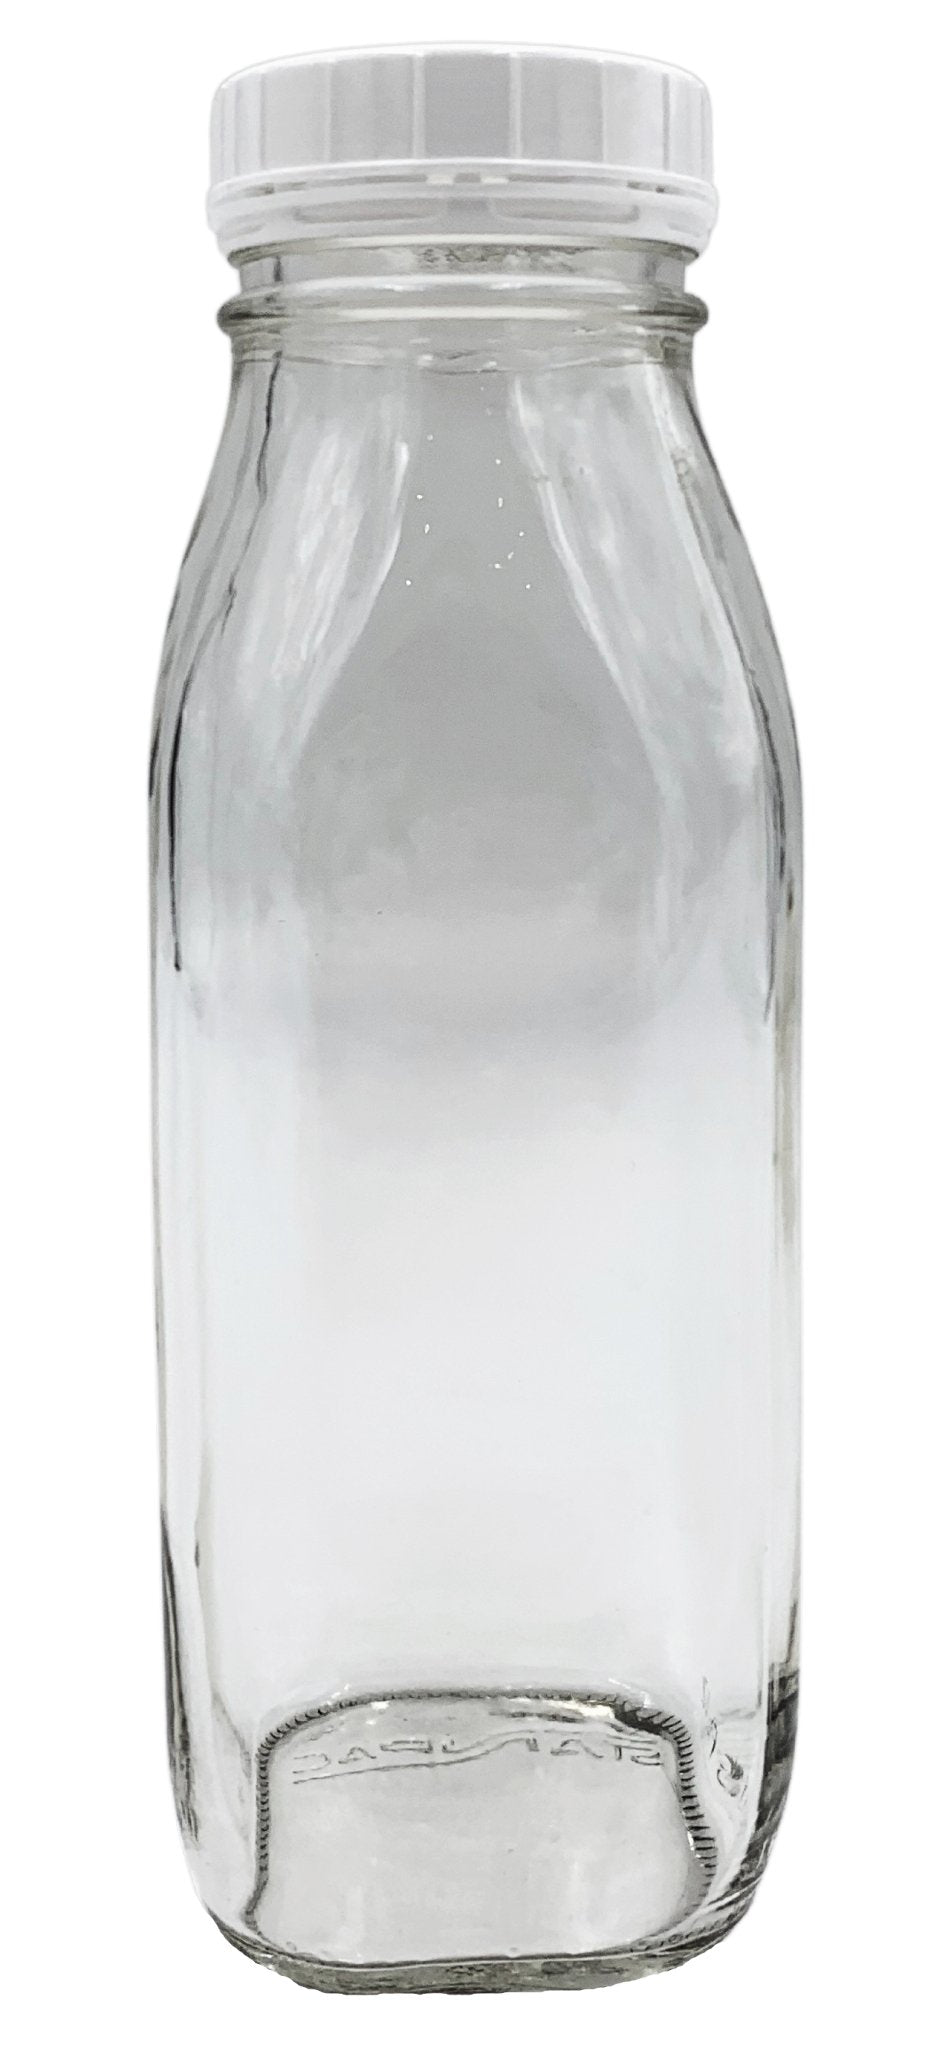 16 Oz Glass Water Bottle Virtually Unbreakable with Thick Sides and Screw-on Cap - Better Beverage Bottles